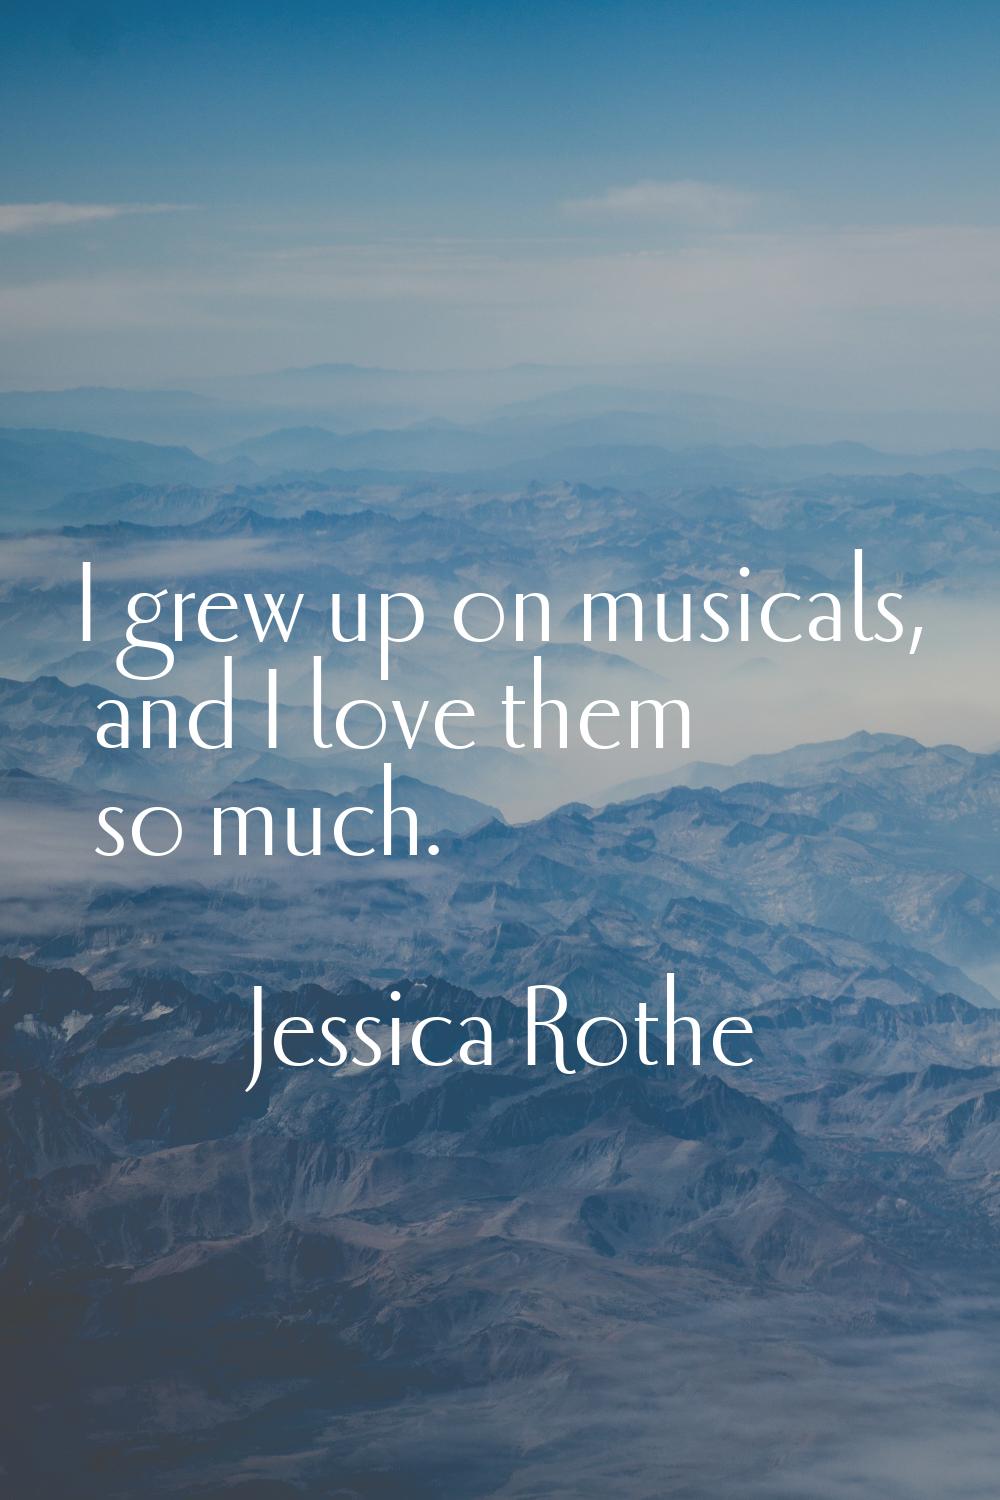 I grew up on musicals, and I love them so much.